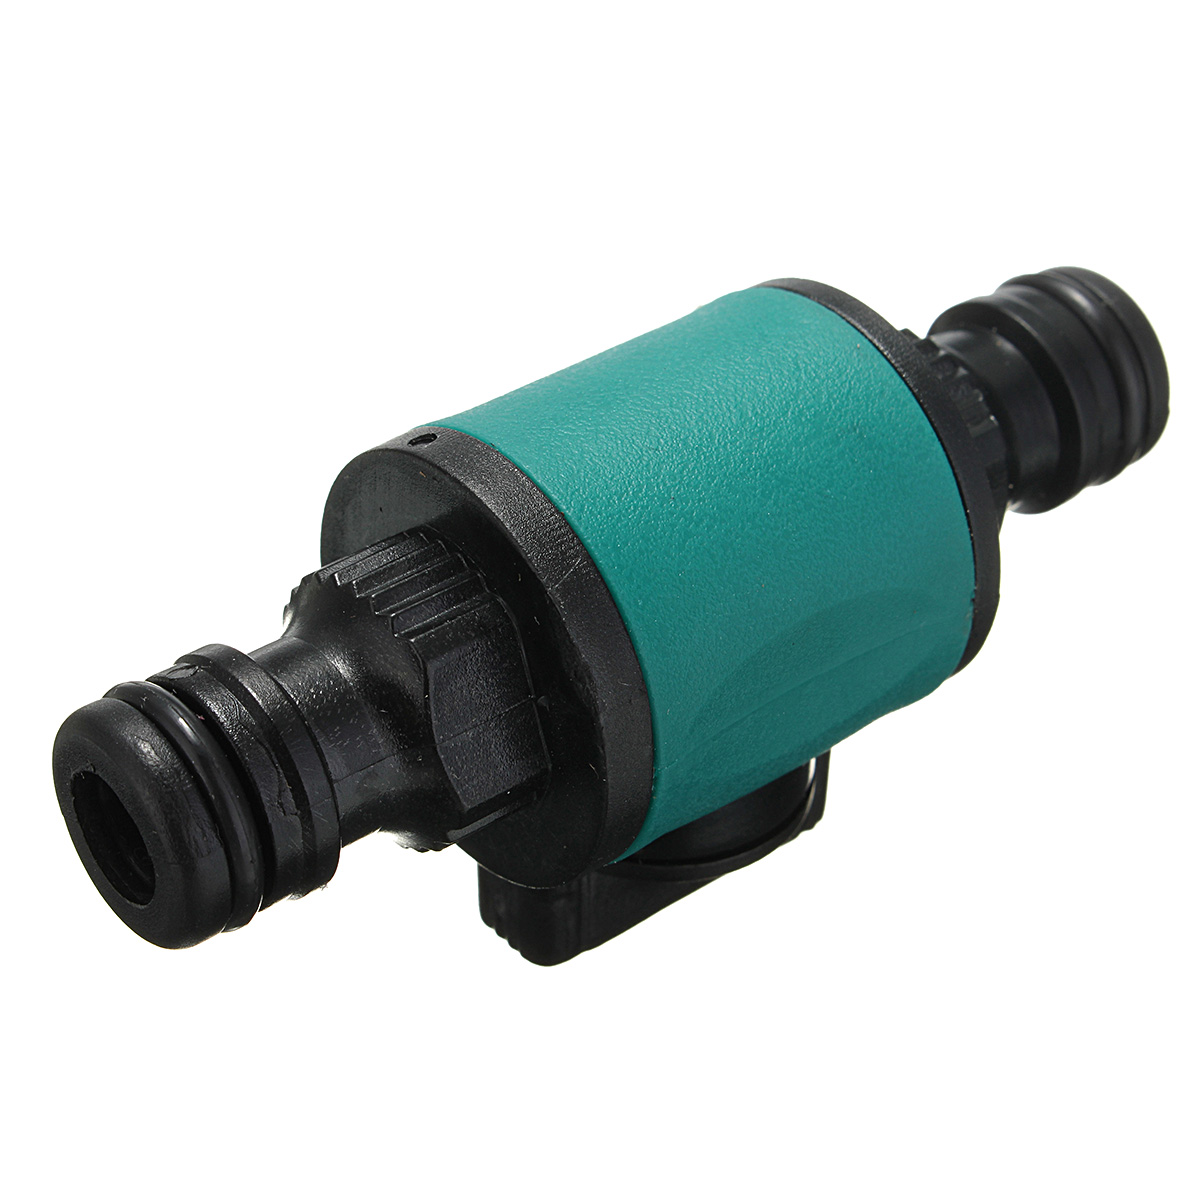 Garden-Hose-Tap-Pipe-Compatible-12-2-Way-Connector-Valve-Convertor-Fitting-Adapter-Tool-1290232-5